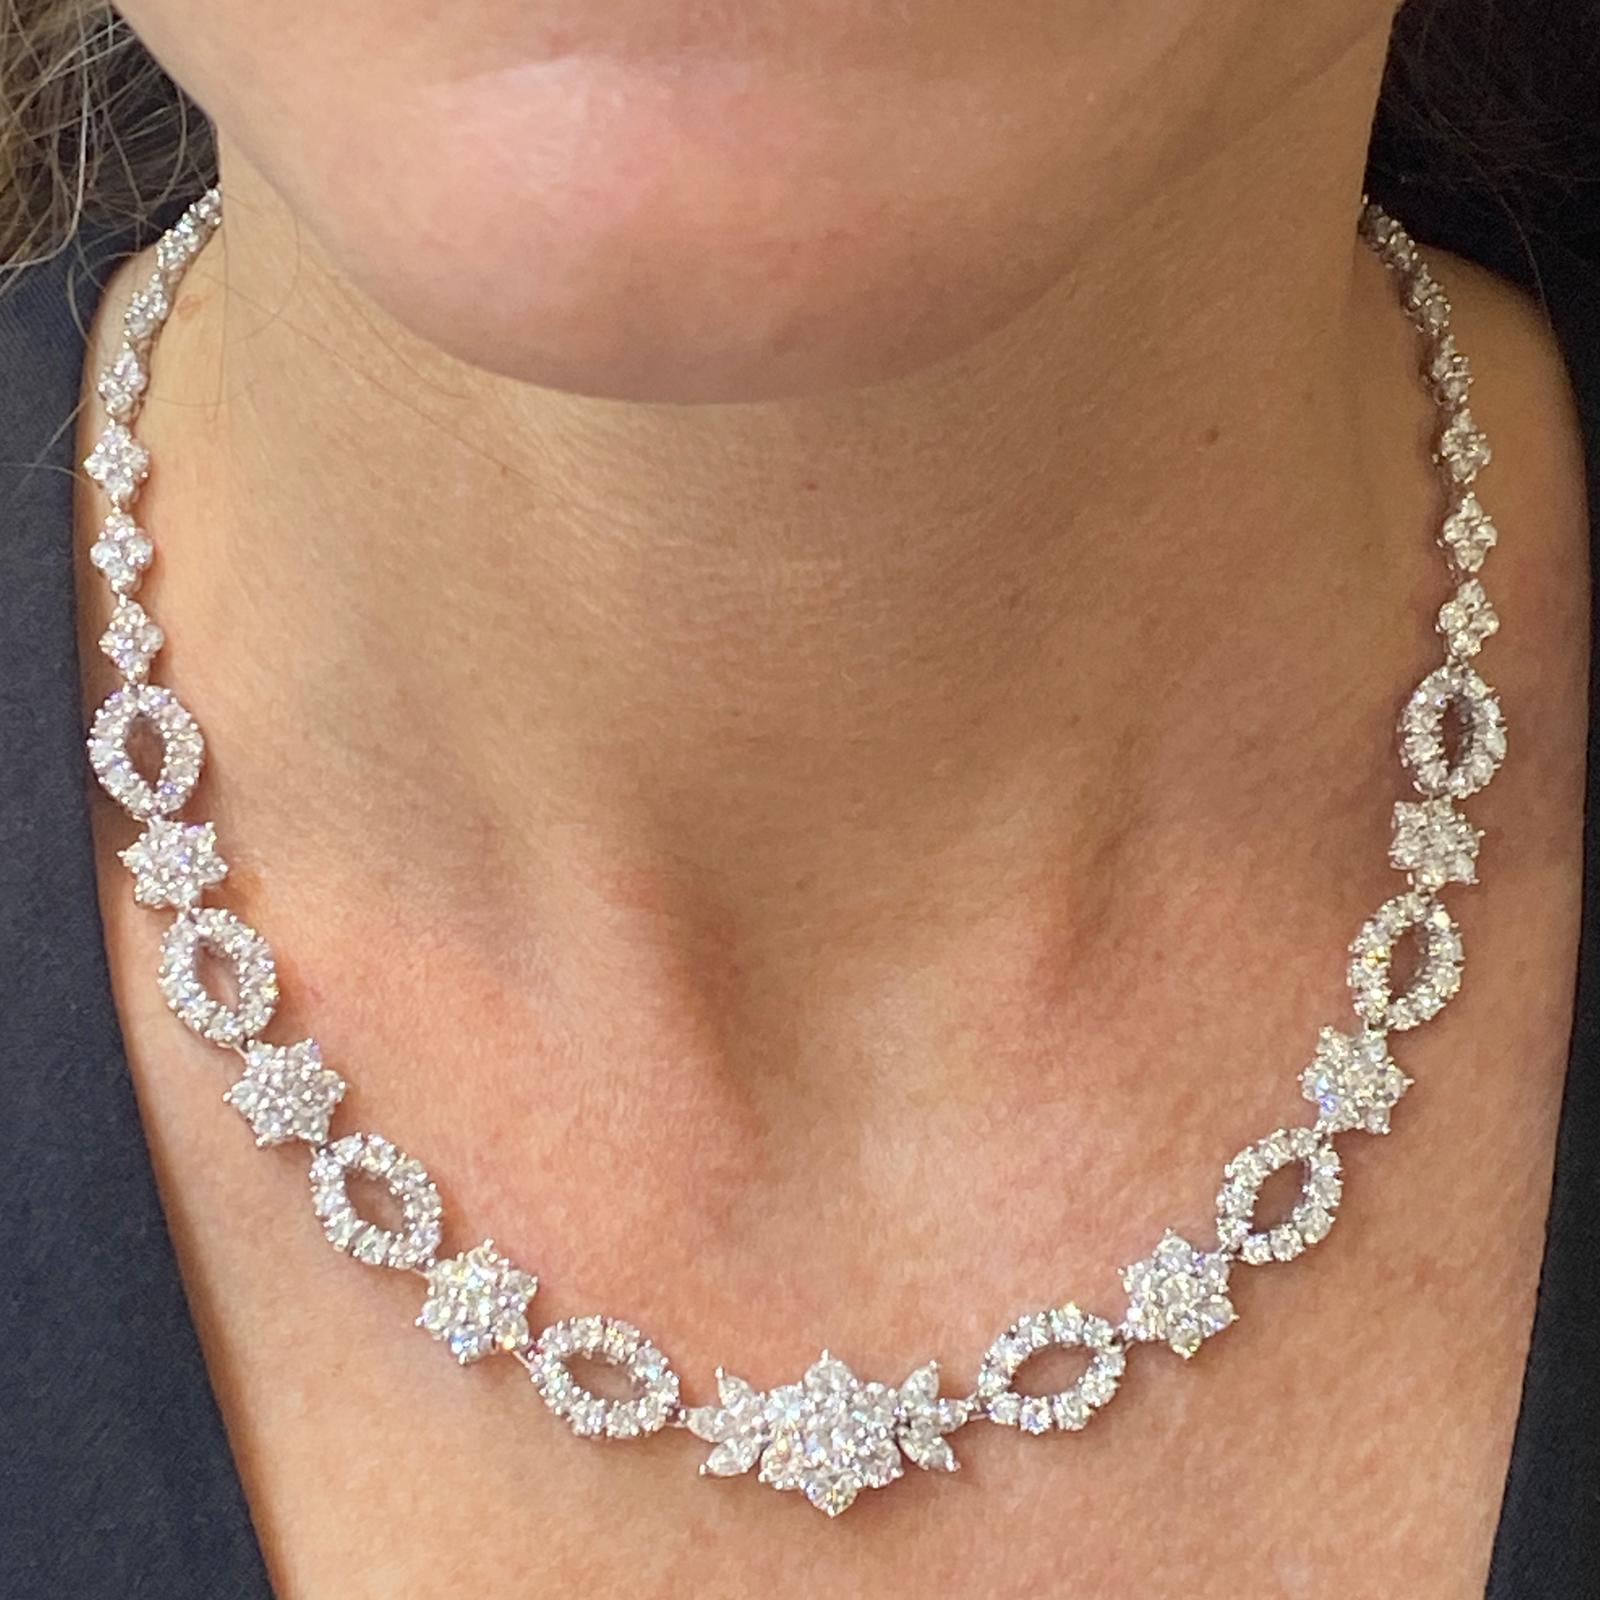 Stunning estate diamond necklace fashioned in platinum. The diamond necklace features 263 round brilliant cut and marquise cut diamonds weighing approximately 16.88 carat total weight and graded F-G color and VS clarity. The necklace measures 15.5